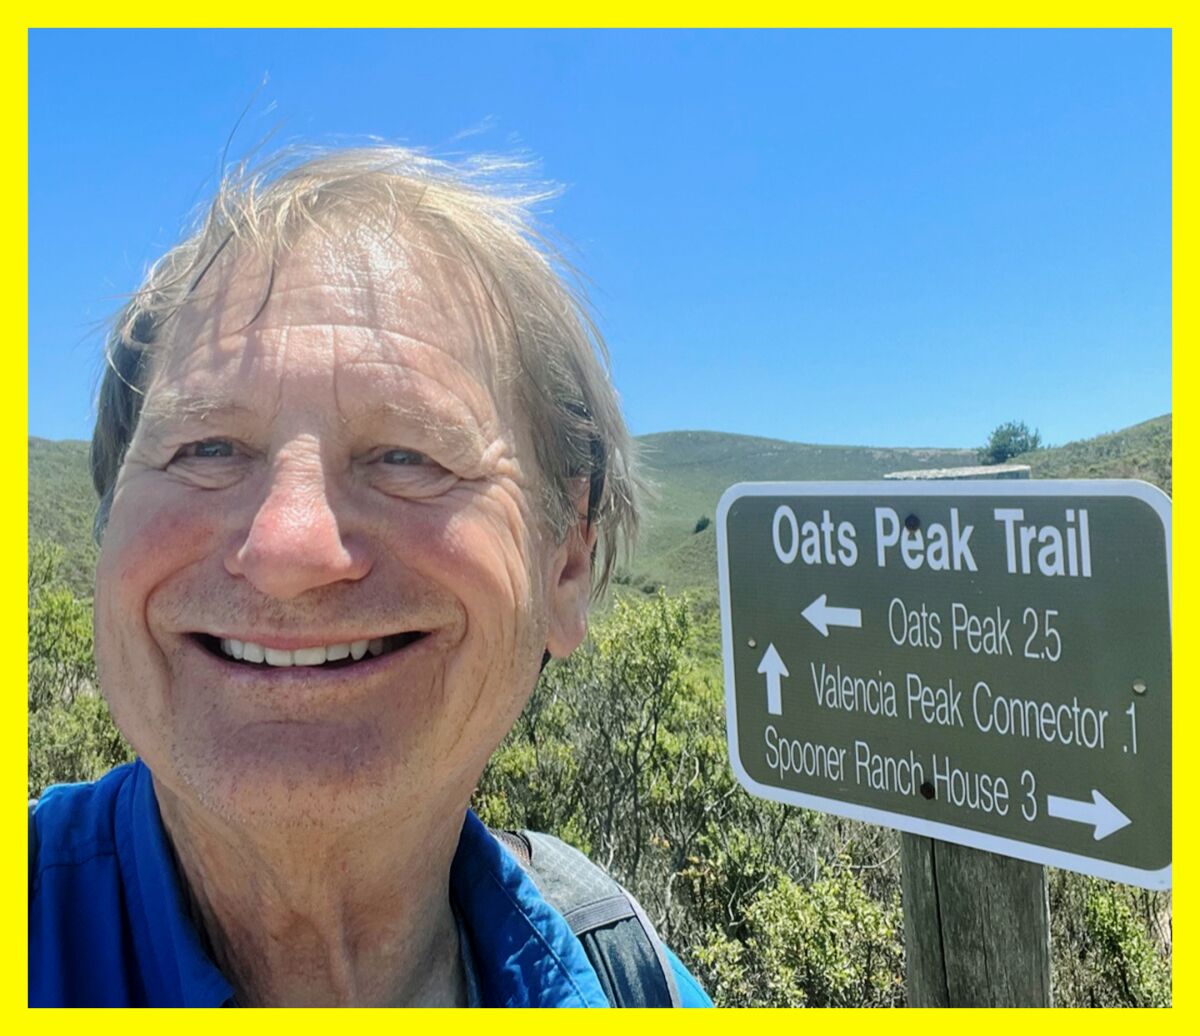 A smiling man outdoors next to a sign for Oats Peak Trail.